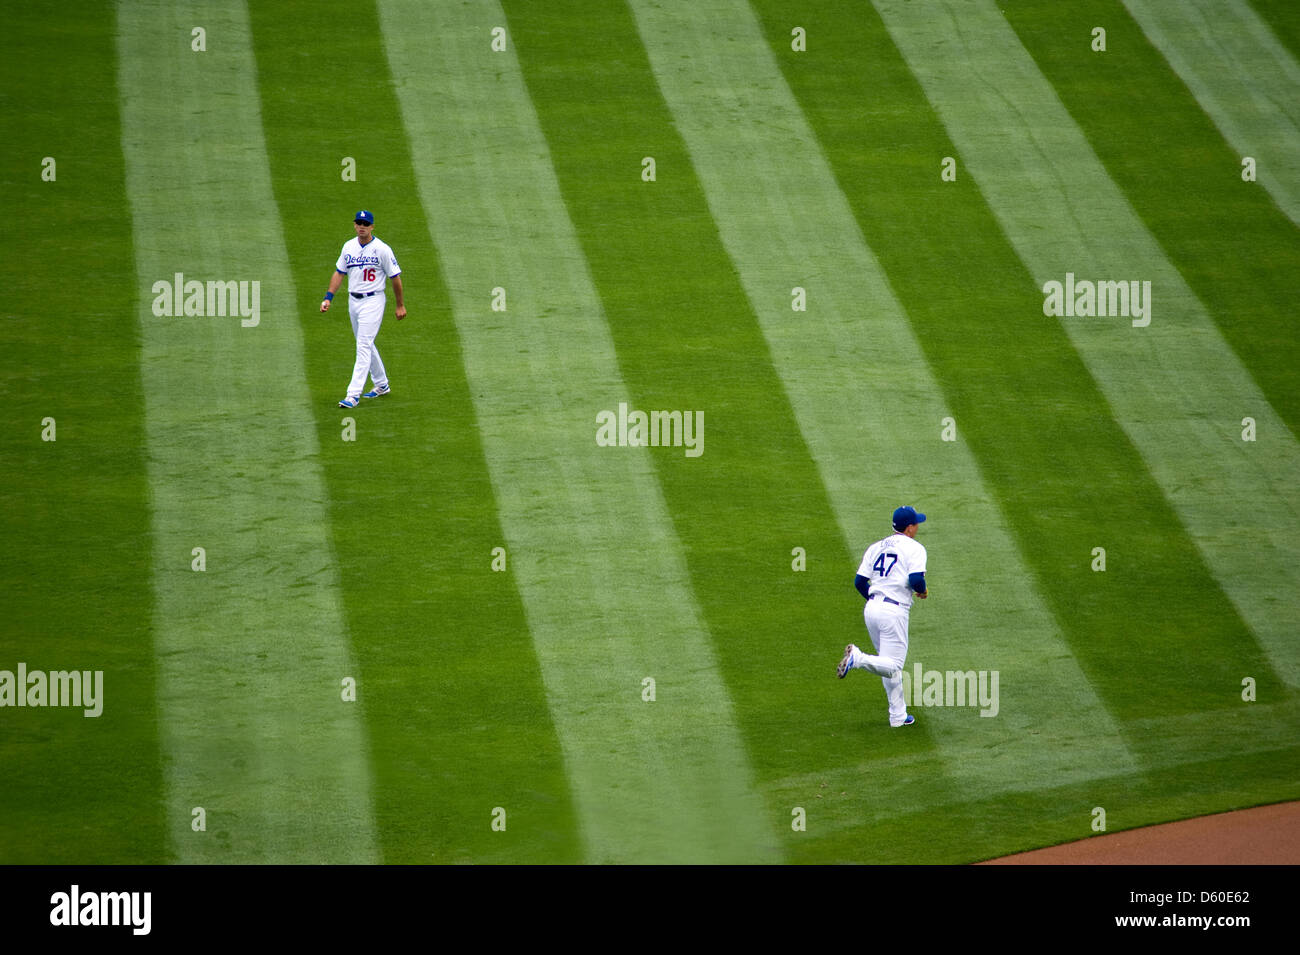 Los Angeles Dodgers players run in the outfield as part of pre-game conditioning. Stock Photo